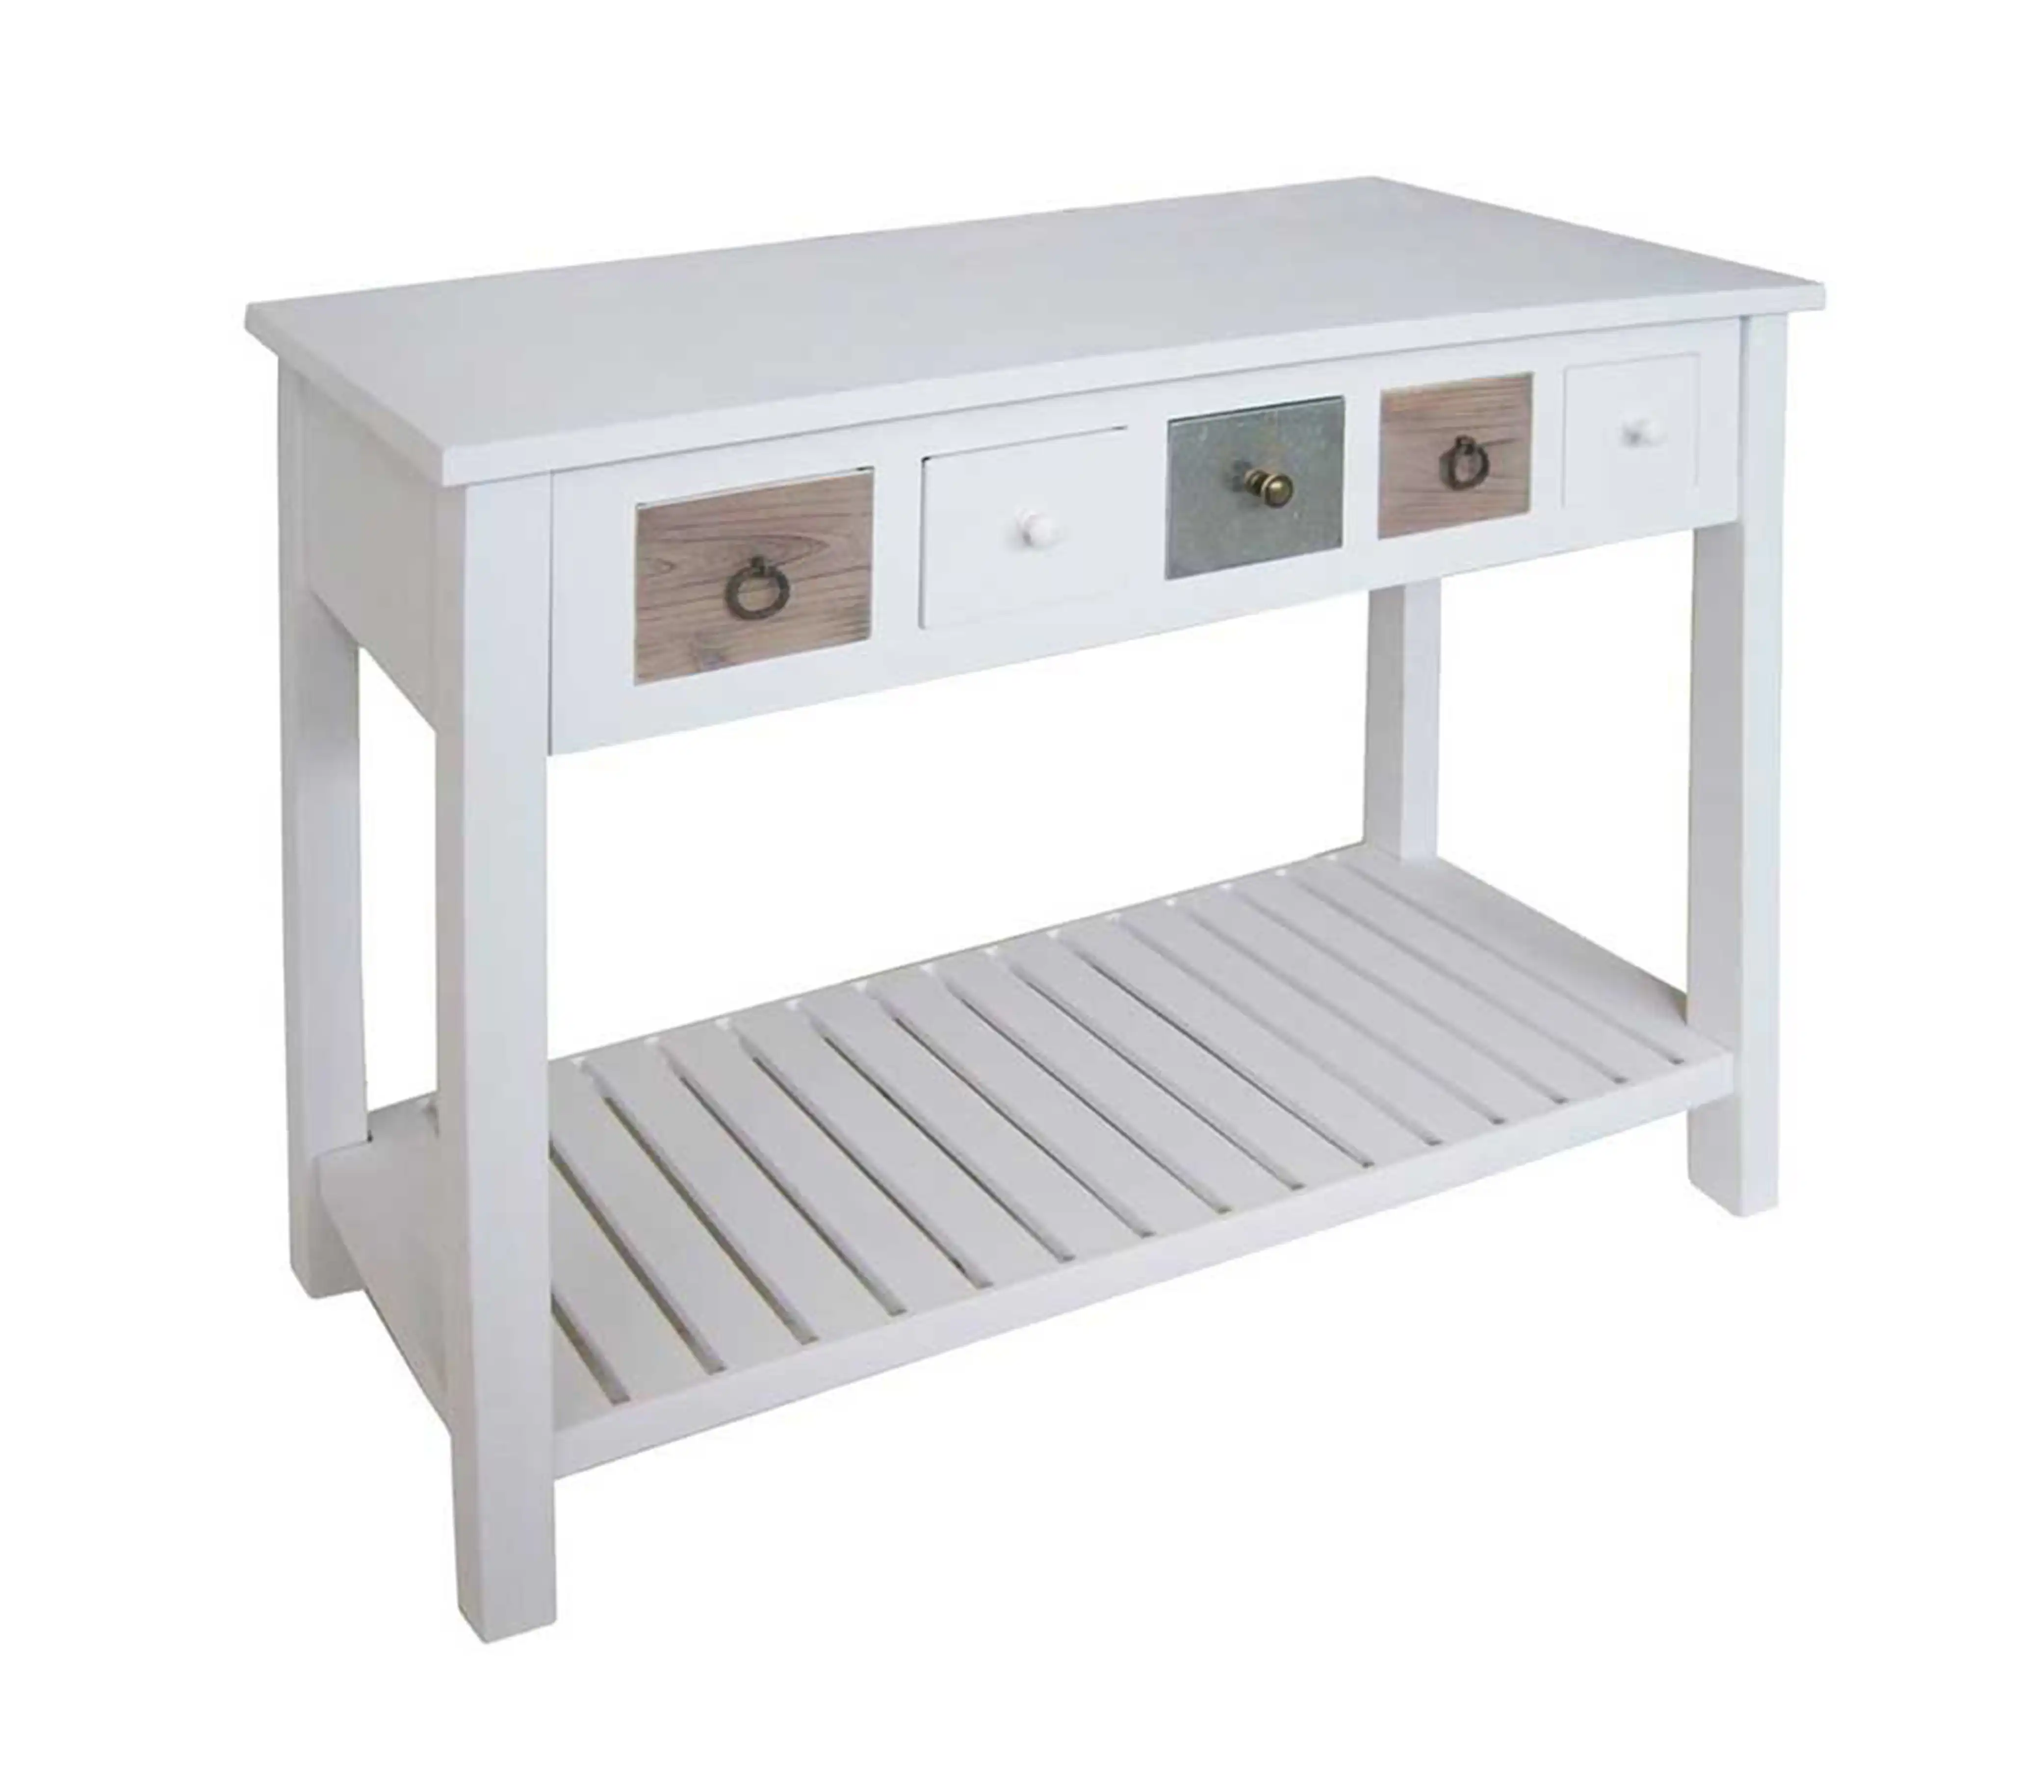 Table with 5 drawers - popular handicrafts